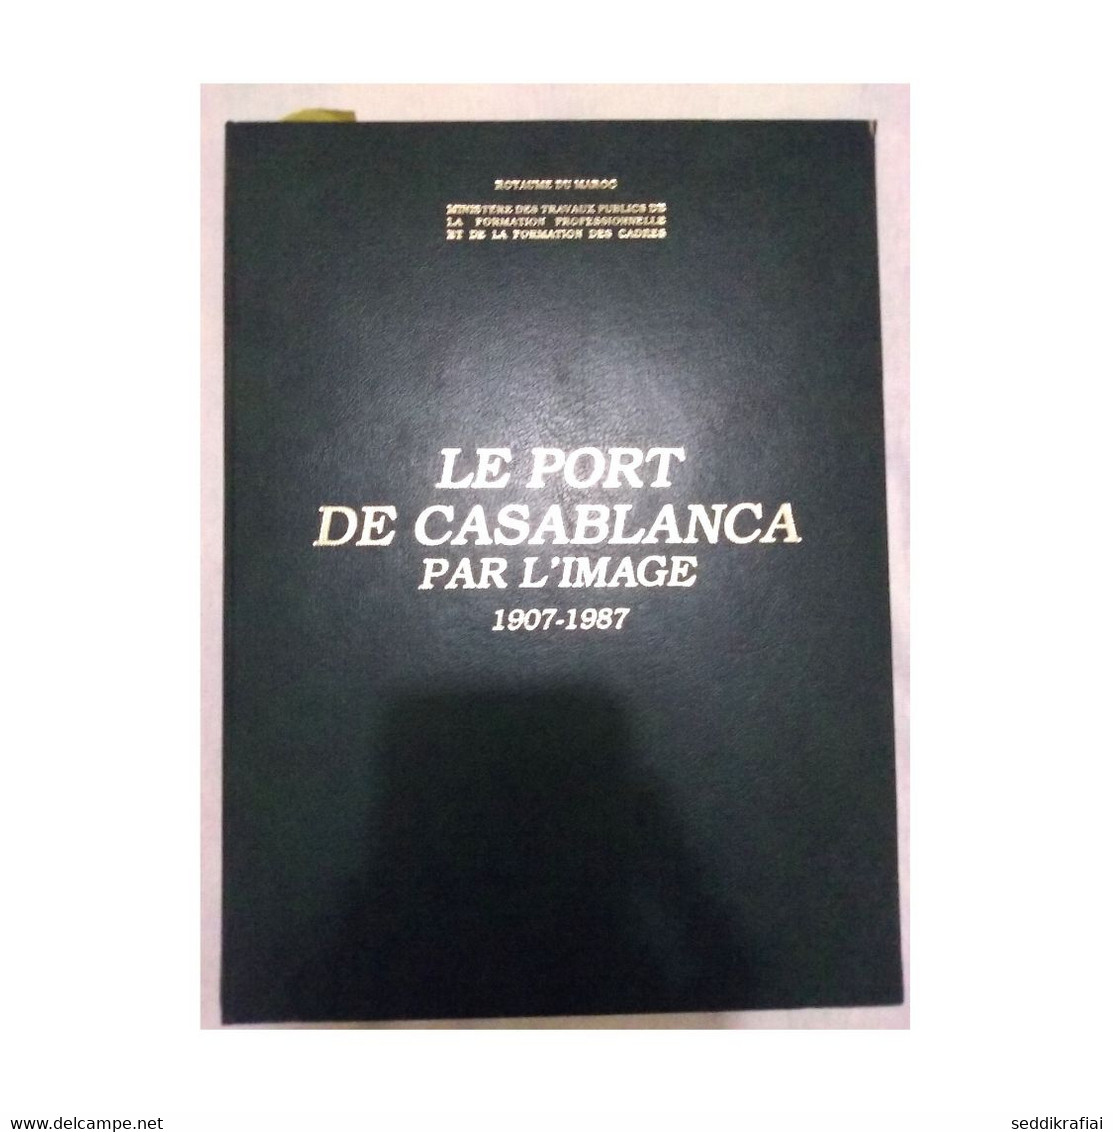 Vintage Morocco Book The Port Of Casablanca Binding Leather By The Image 1907-1987 Hassan 2 - Riviste & Cataloghi